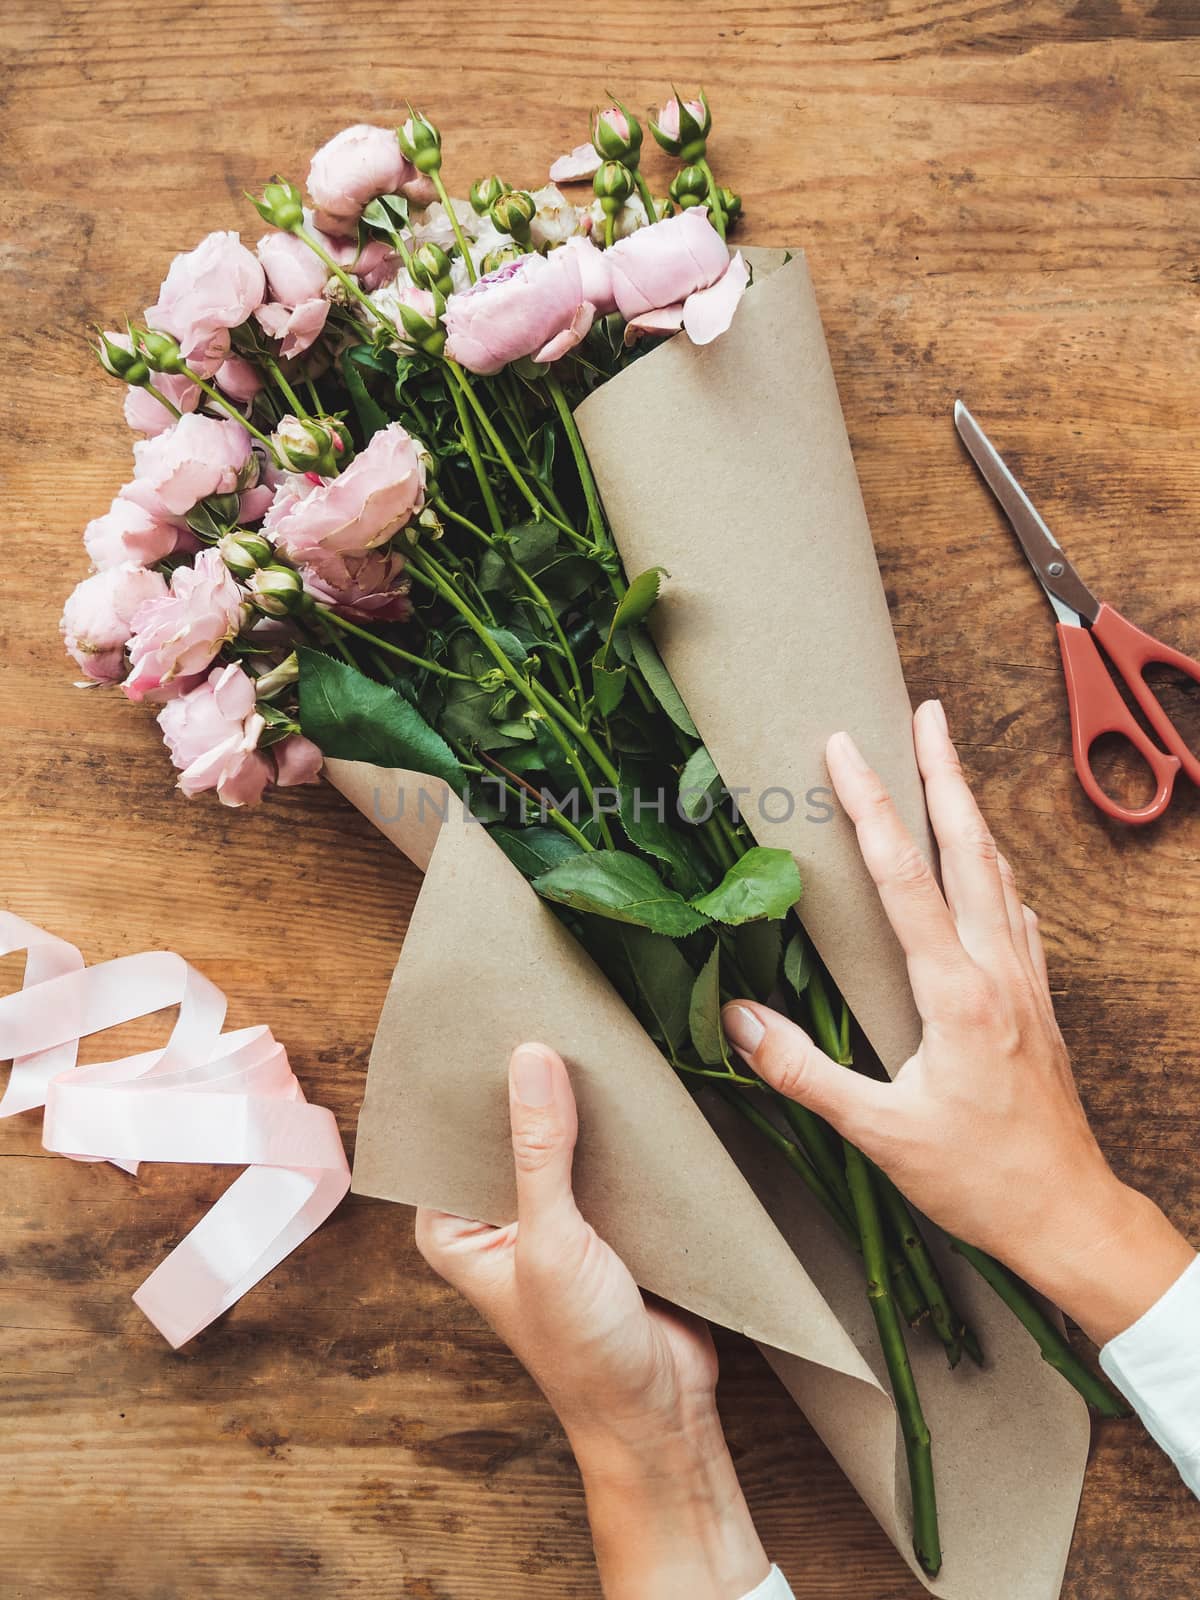 Top view on wooden table with roses, scissors, craft paper and pink ribbon on it. Florist work place. Accessories for making bouquets and floral compositions.